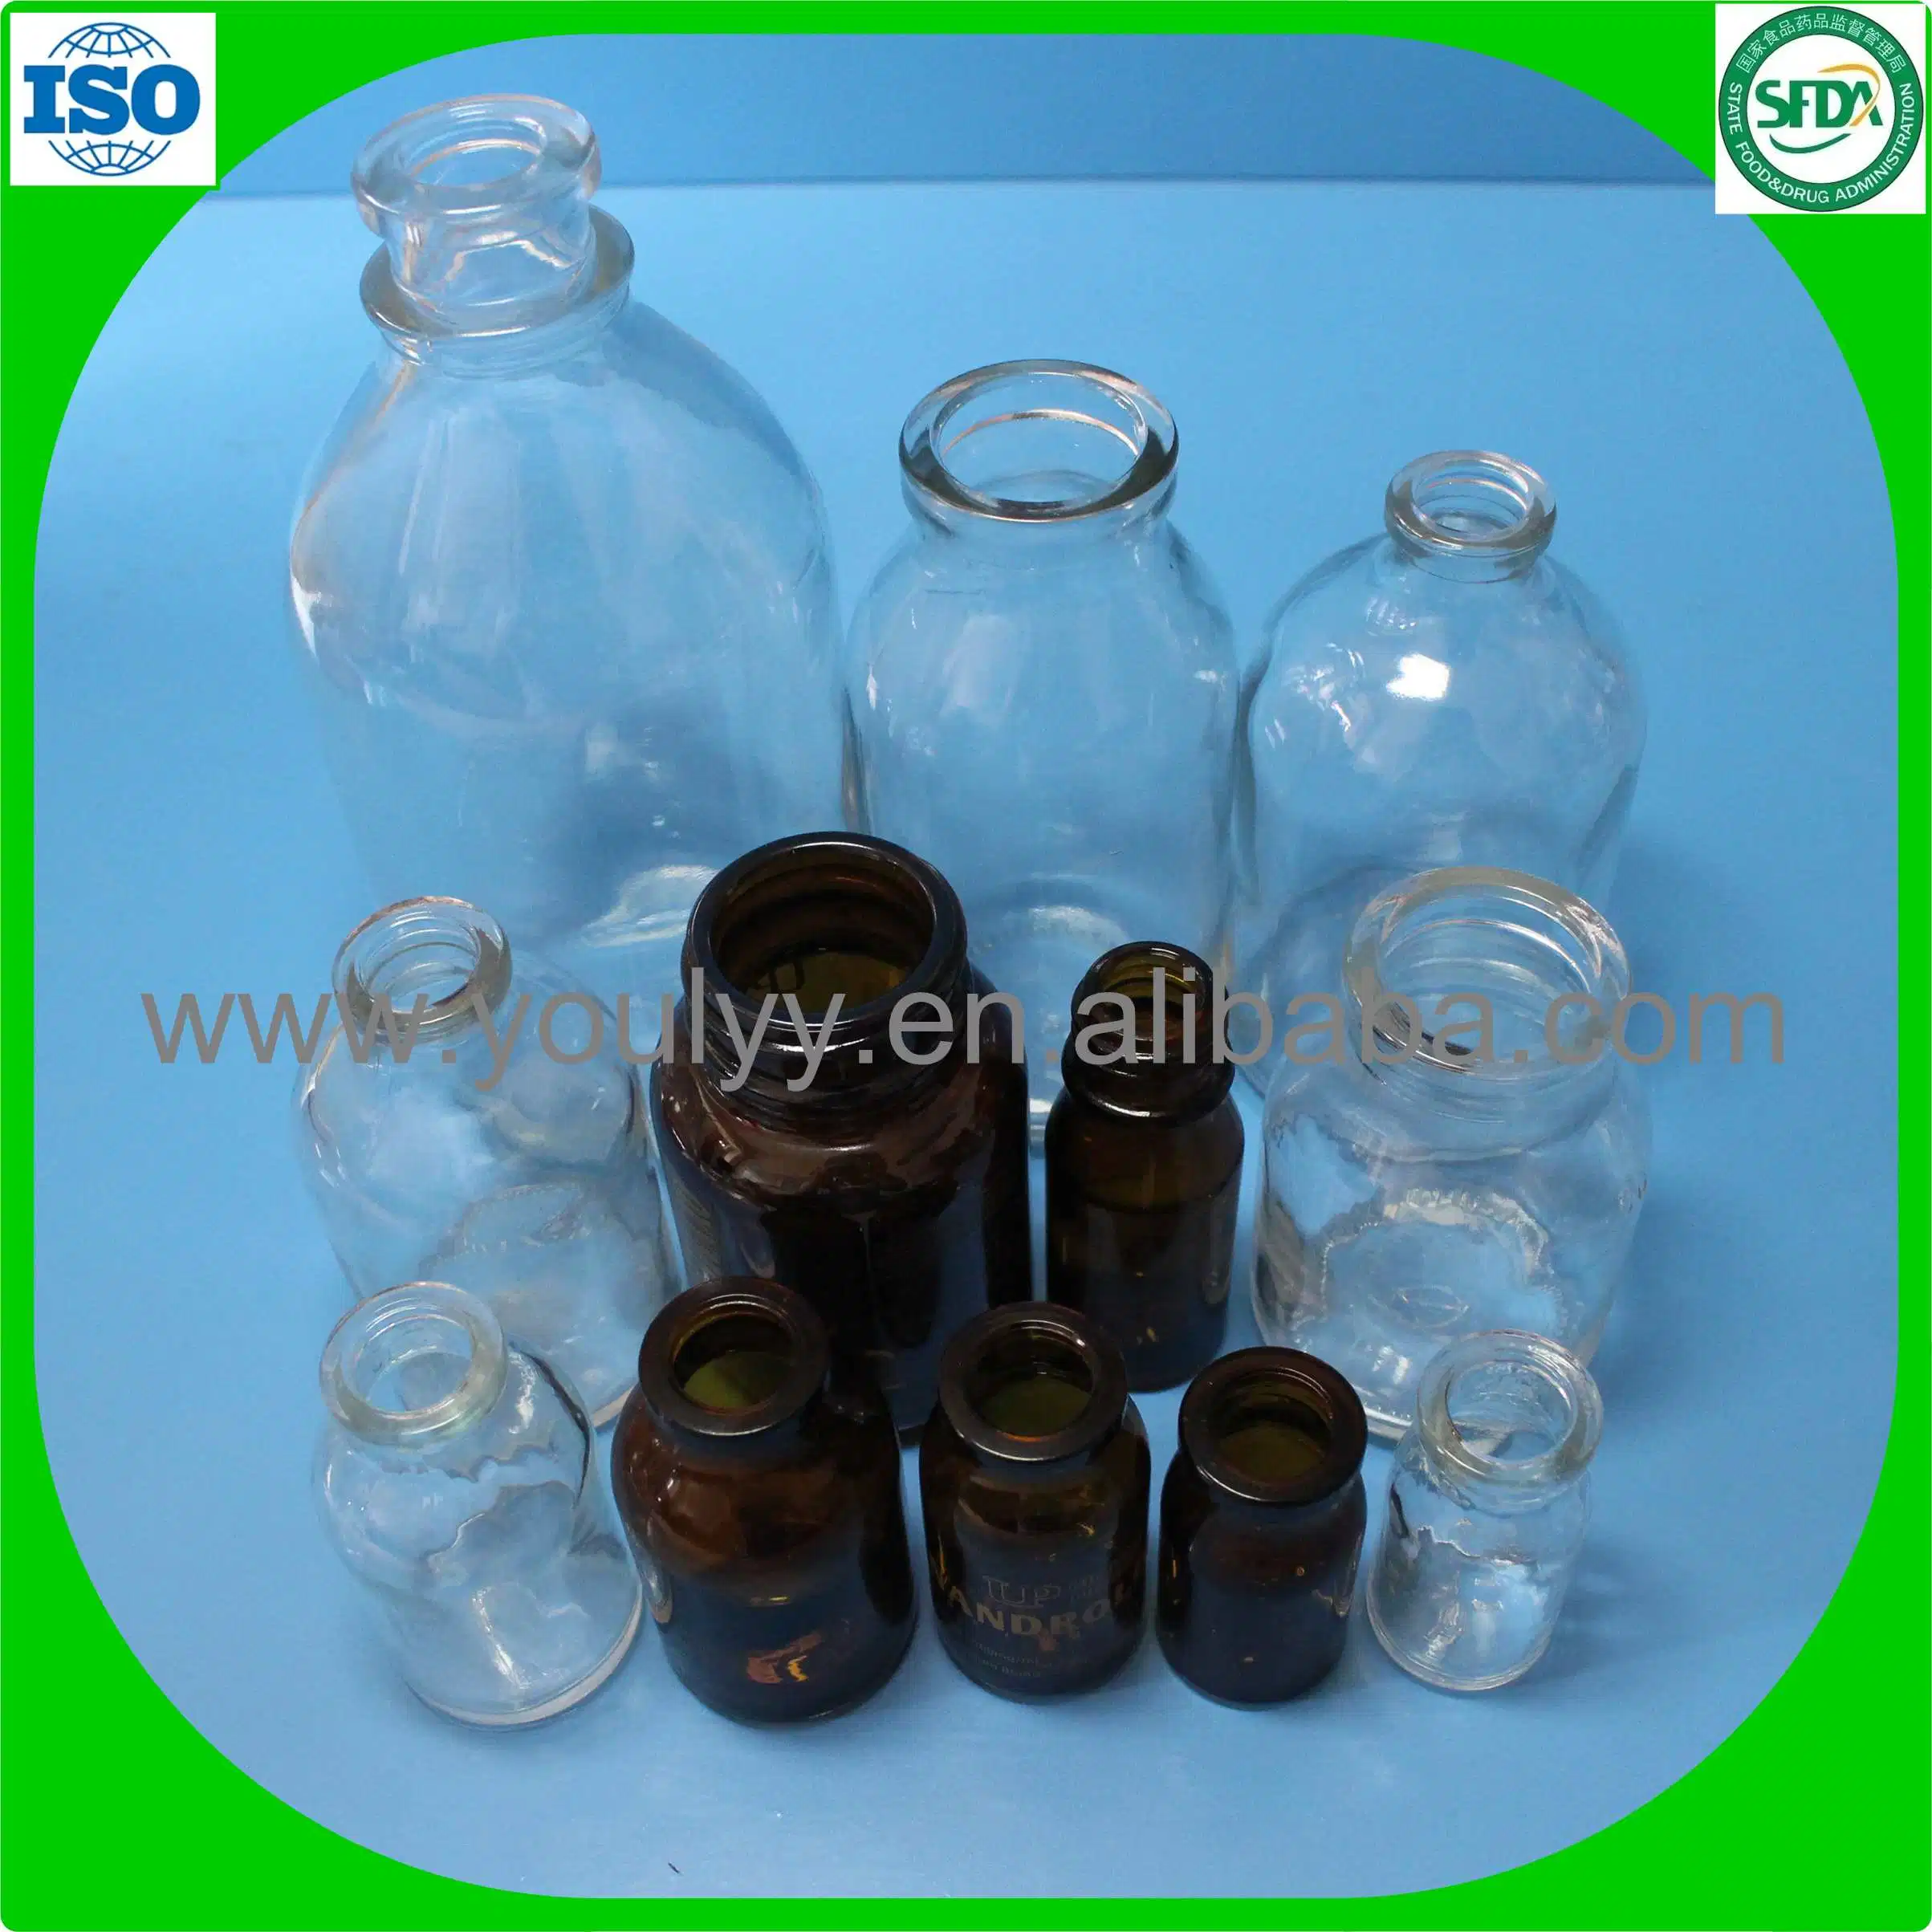 Pharmaceutical Injection Glass Vial